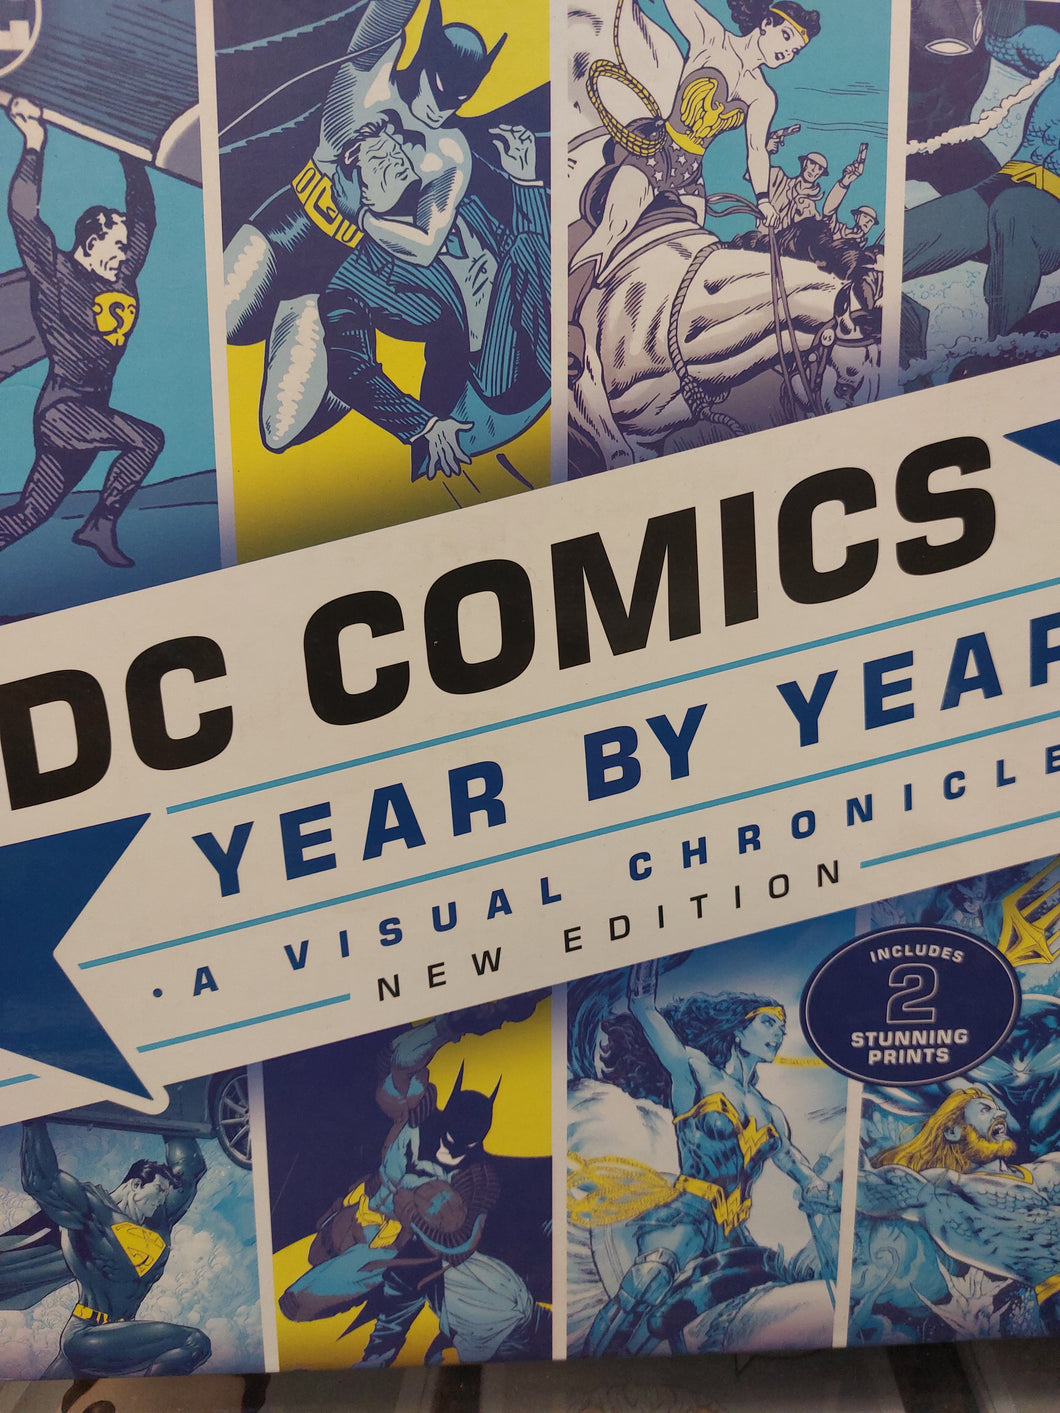 DC Comics Year by Year